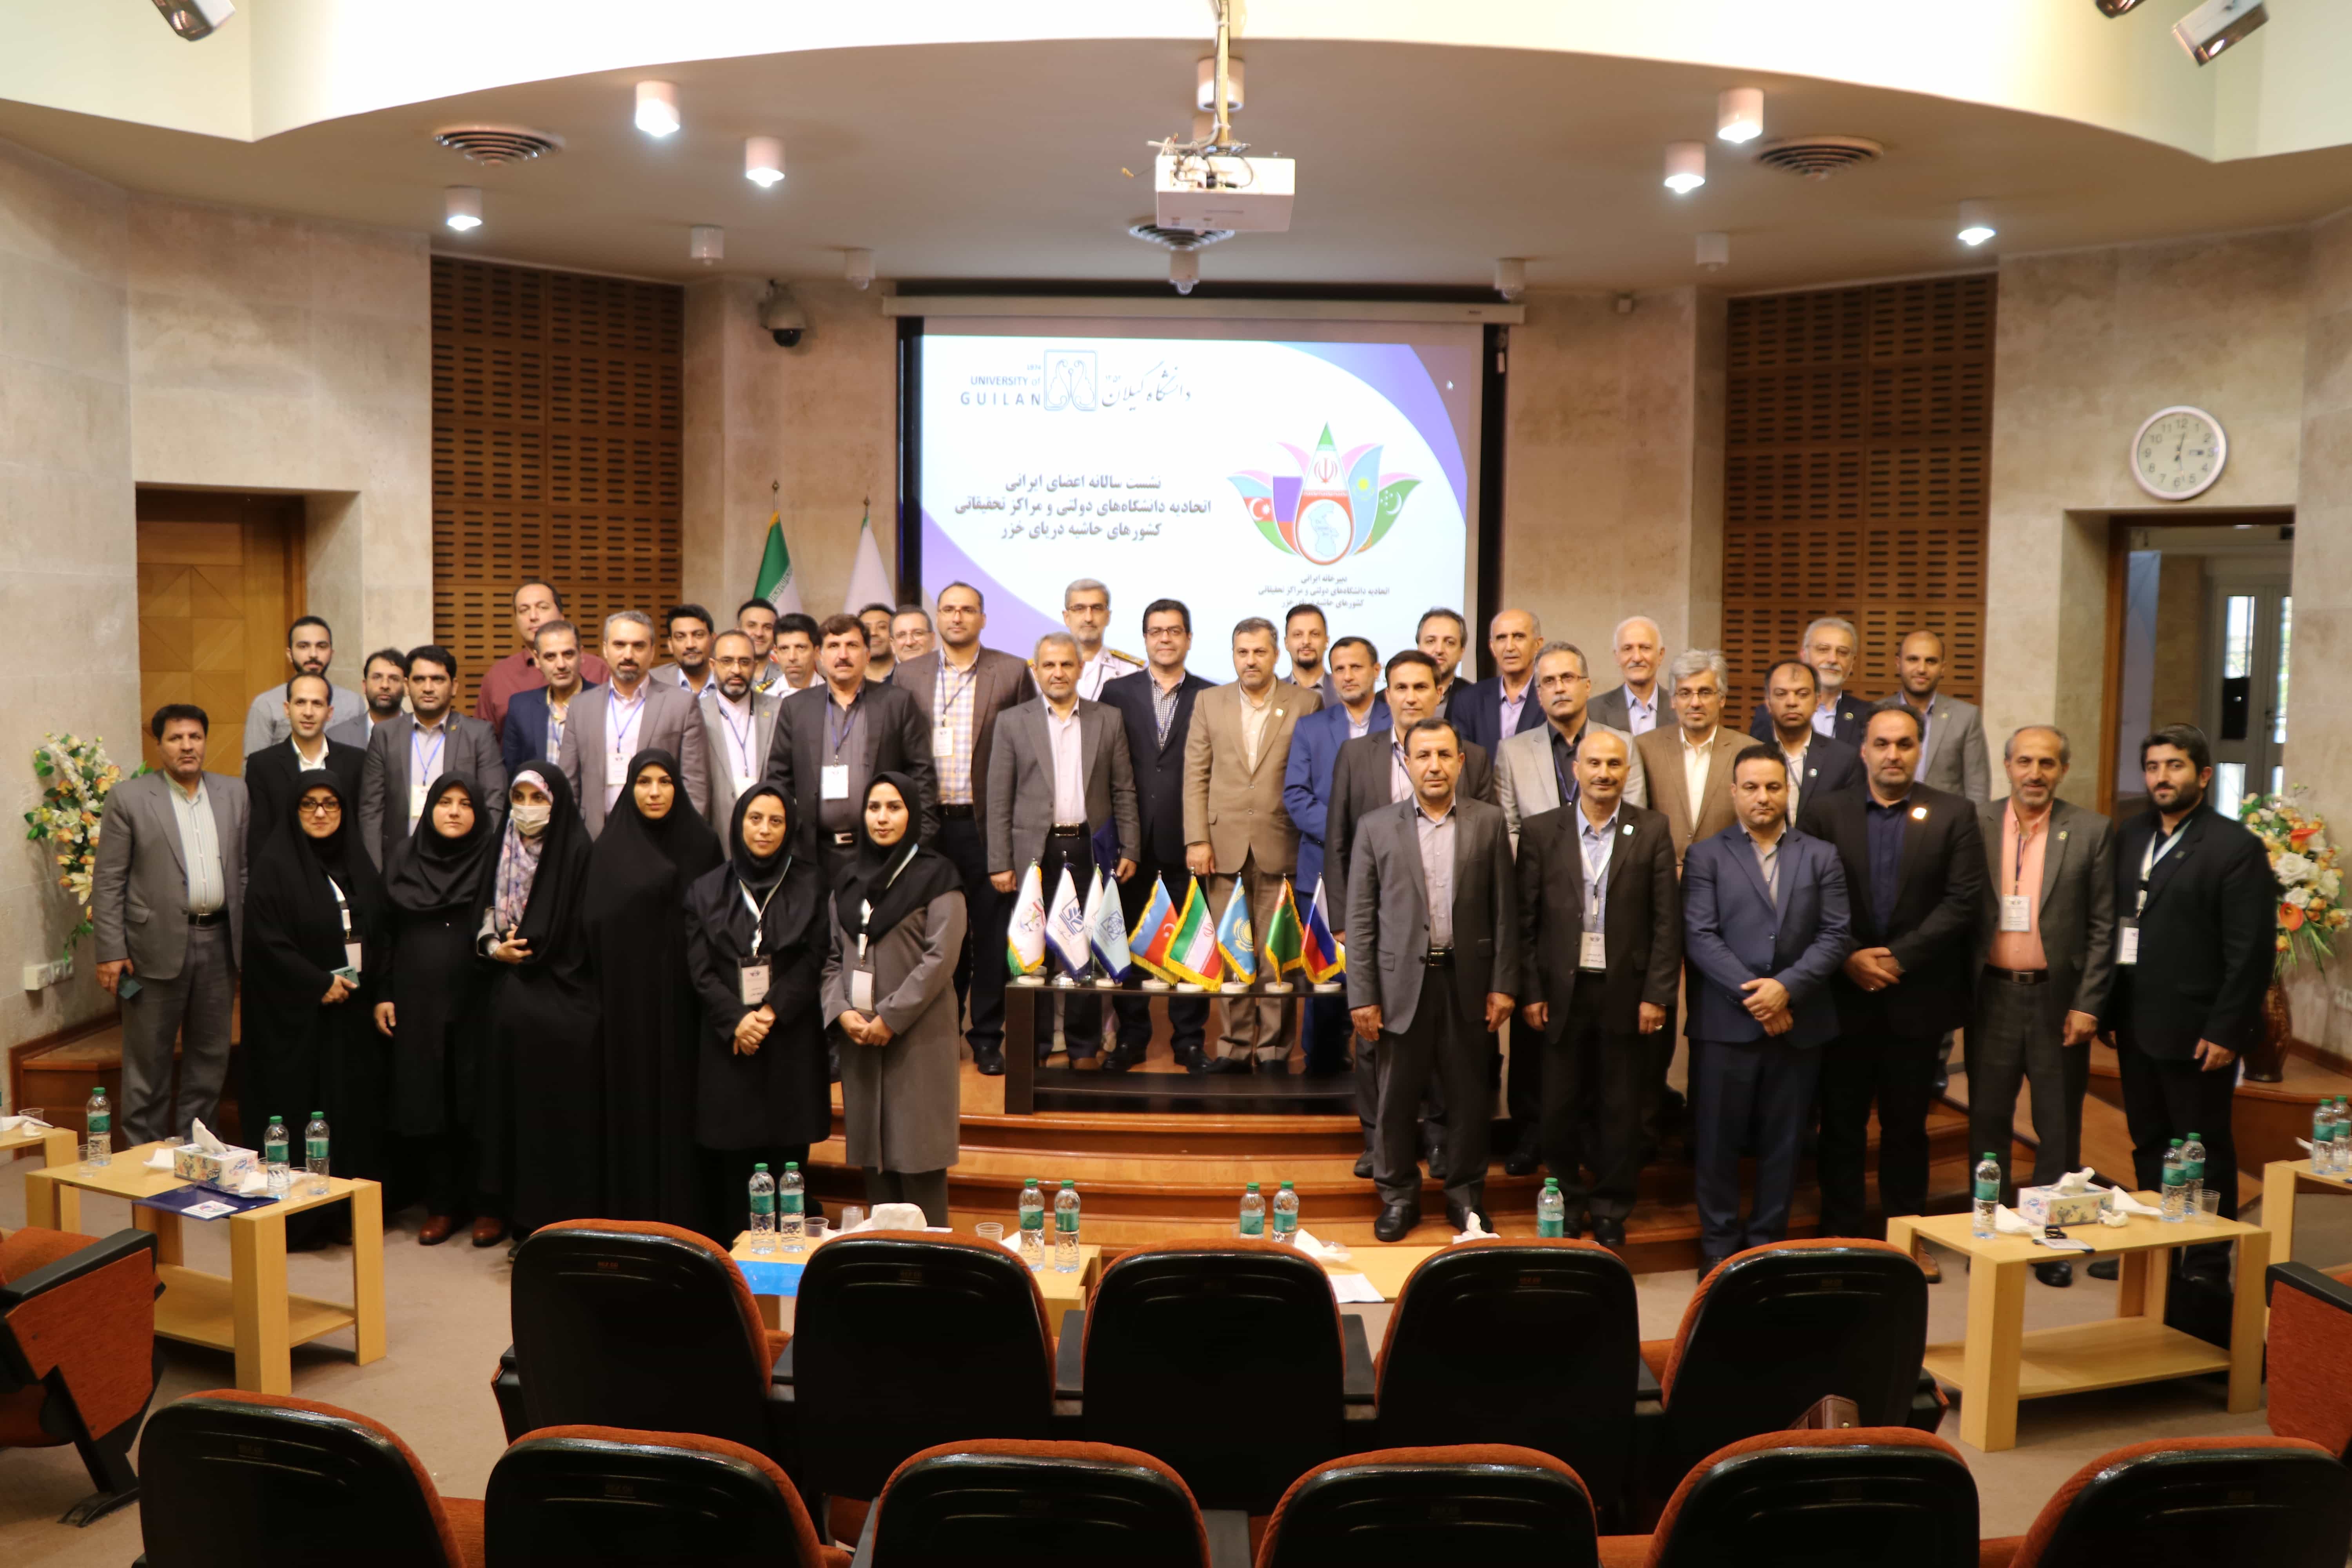 The meeting of the Iranian members of the Association of State Universities and Research Centers of the Caspian Sea Region Countries was held at the University of Guilan participating Iranian and international guests